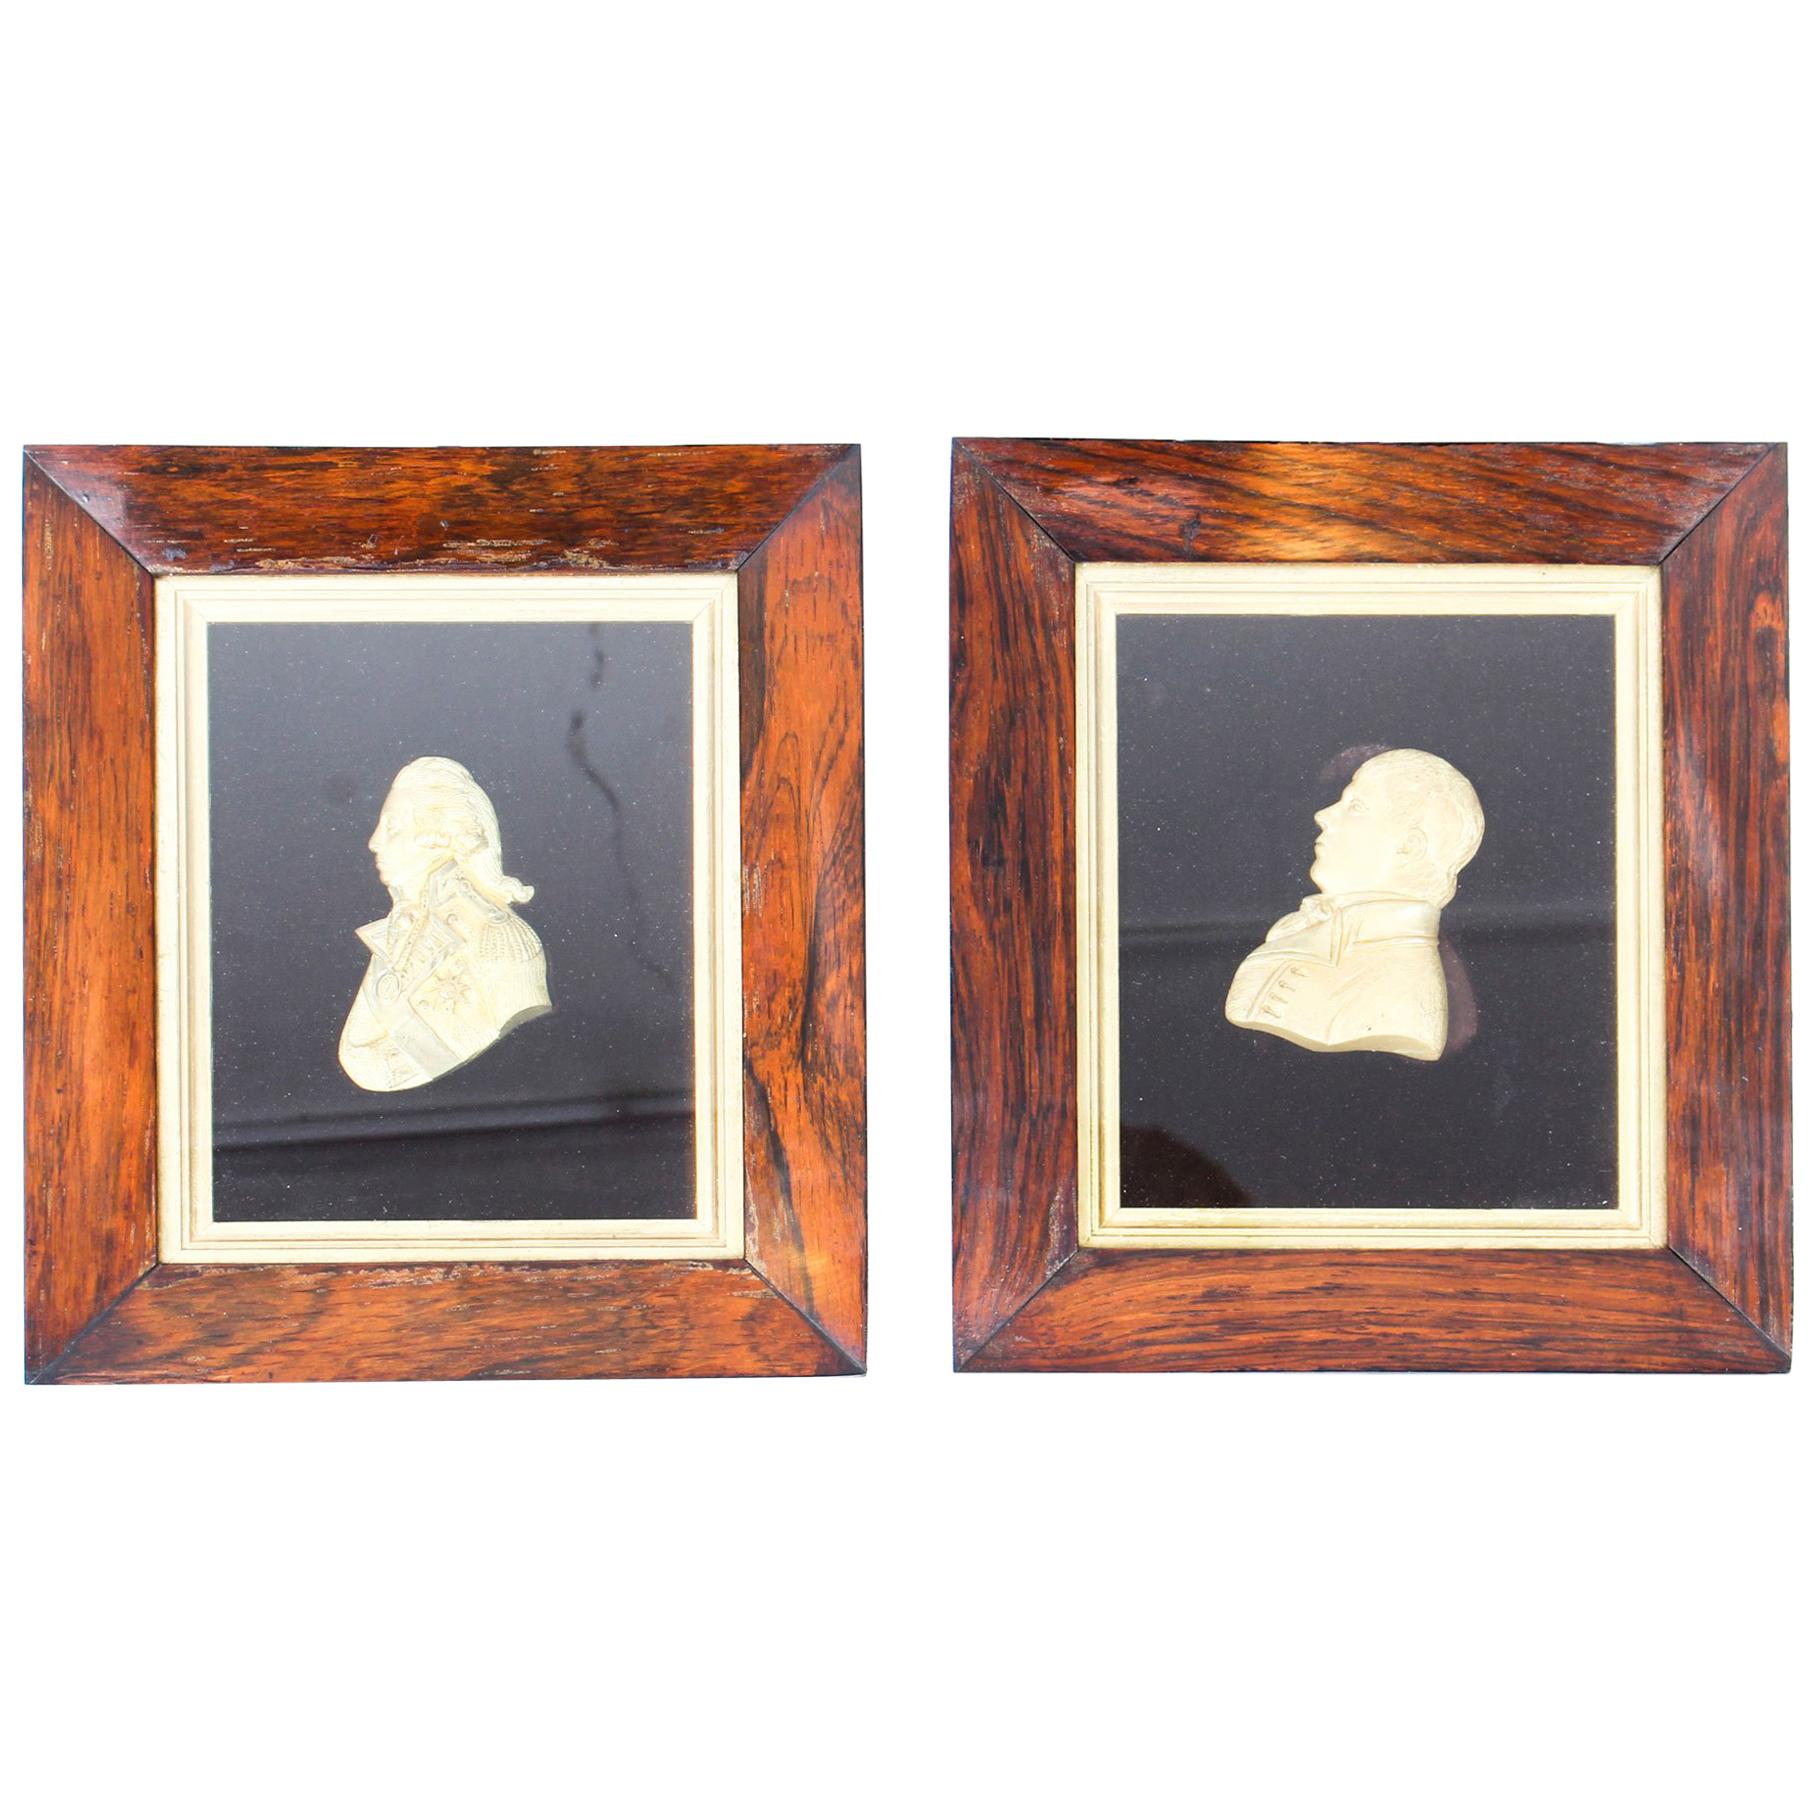 Antique Pair English Framed Ormolu Busts of Classical Gentleman, 19th Century